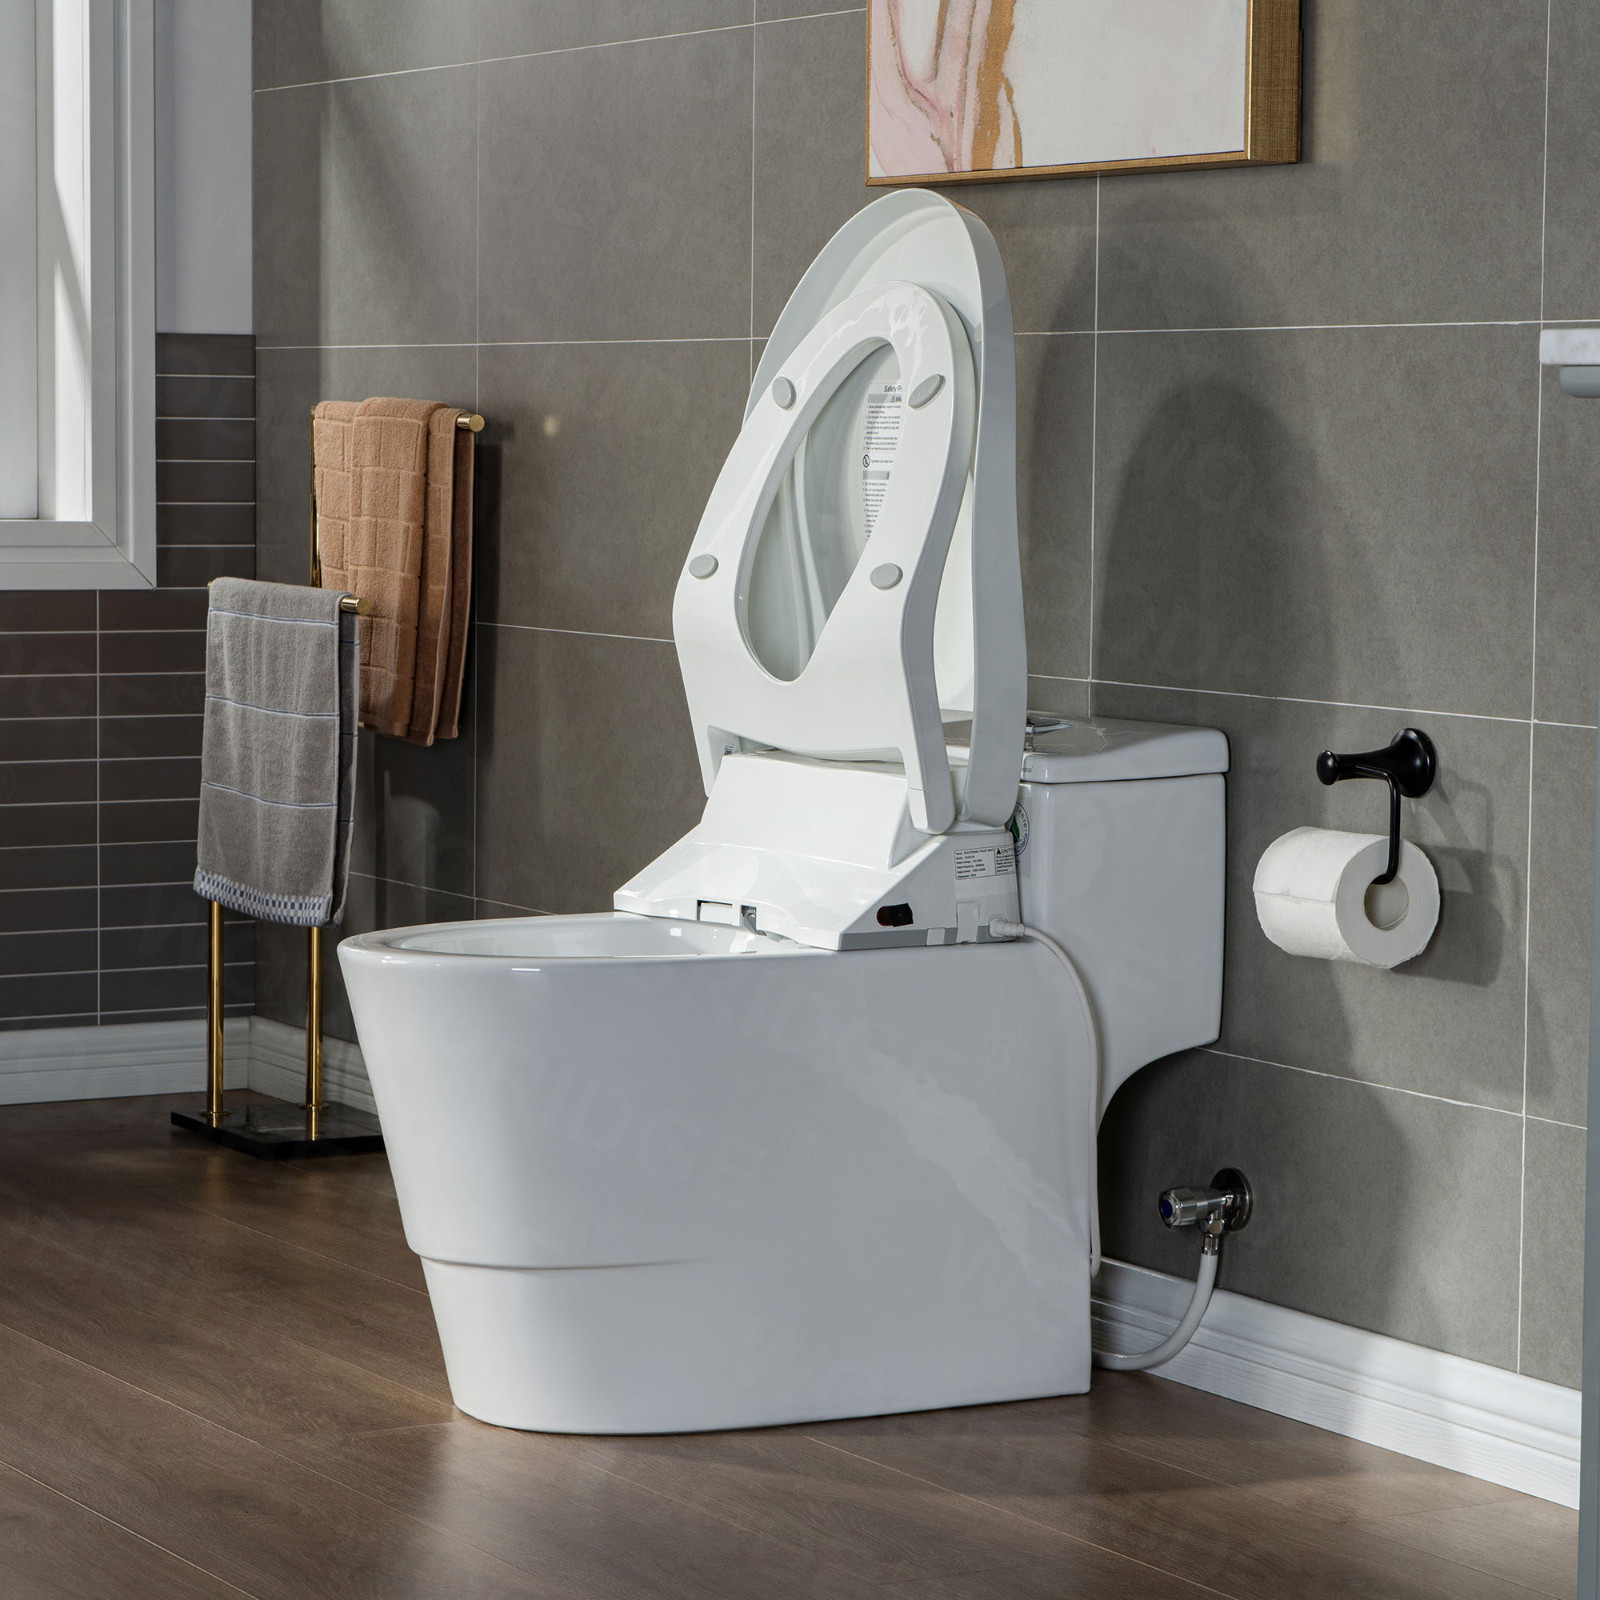  WOODBRIDGE Toilet & Bidet Luxury Elongated One Piece Advanced Smart Seat with Temperature Controlled Wash Functions and Air Dryer, Toilet with Bidet. T-0737, Bidet & Toilet_9729